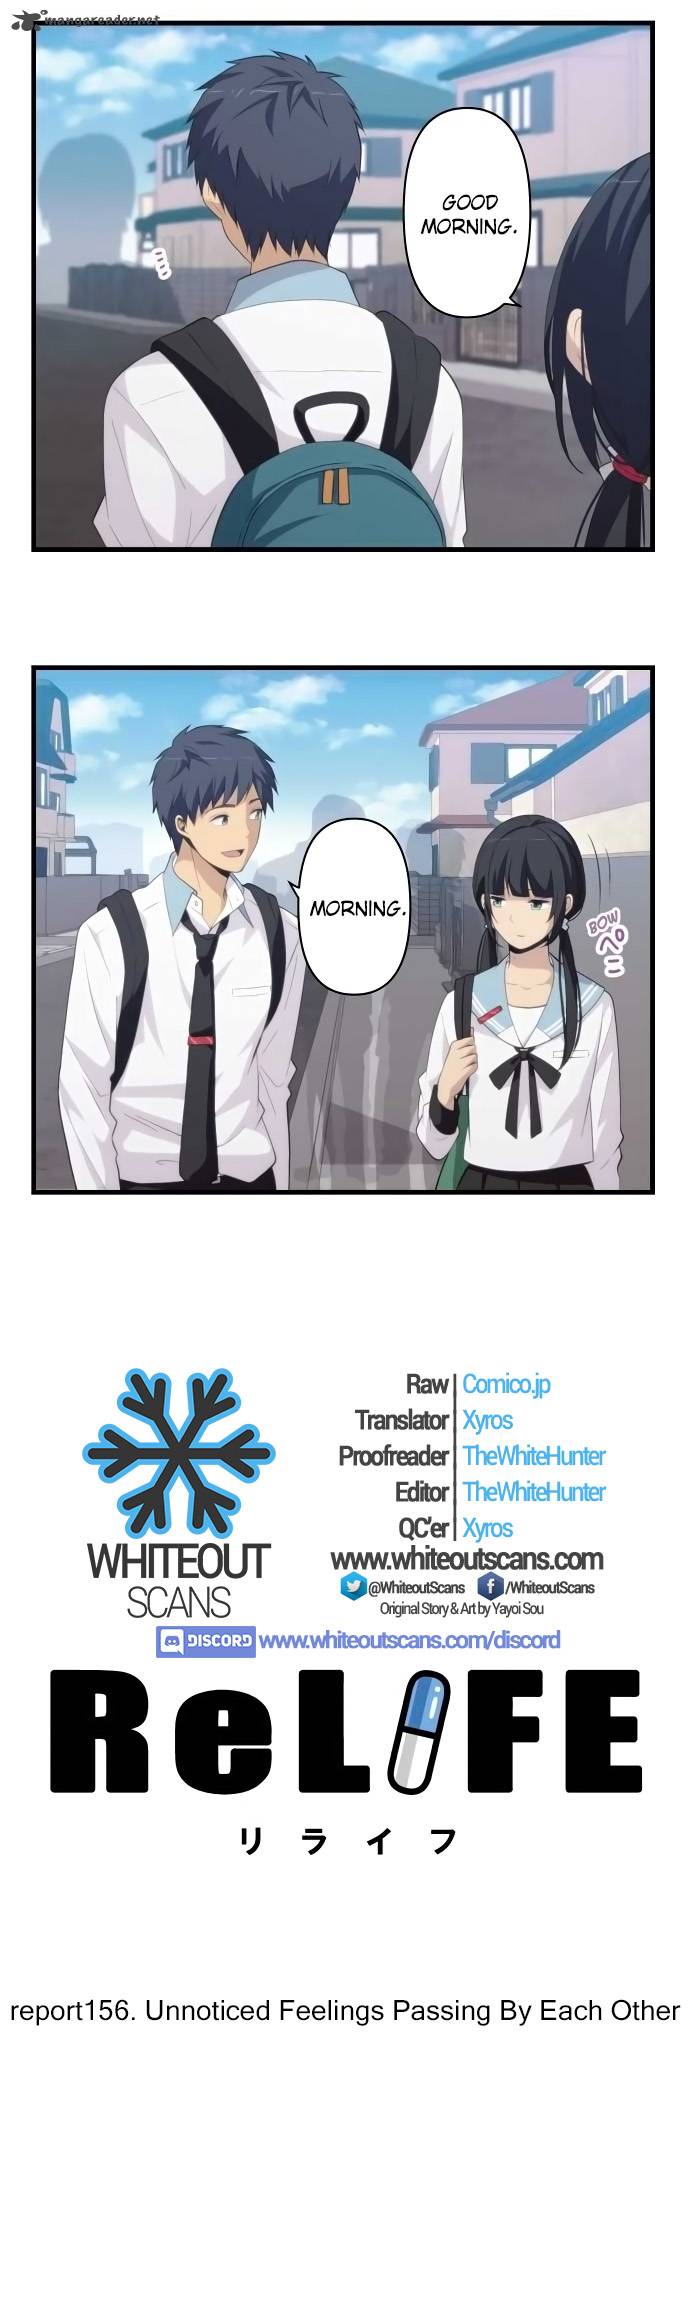 Relife 156 2